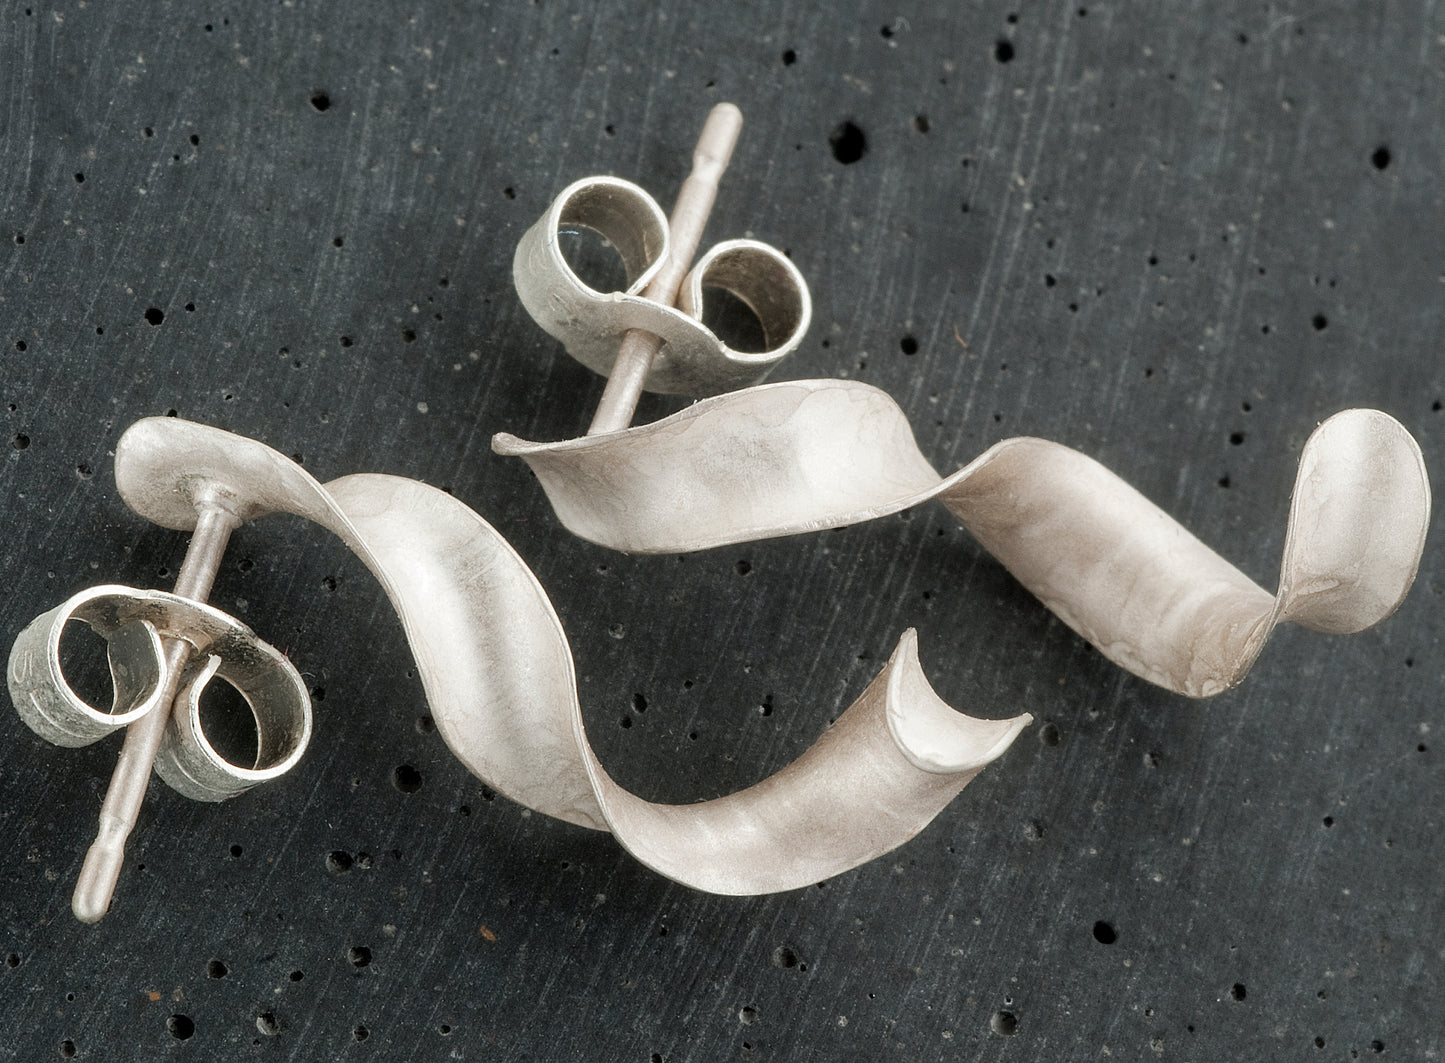 A pair of twisted earrings in sterling silver. They measure about 1.8cm in length. The curly earrings are made by anticlastic raising, which creates simultaneous curves in opposing planes. The finish is satin-matte.